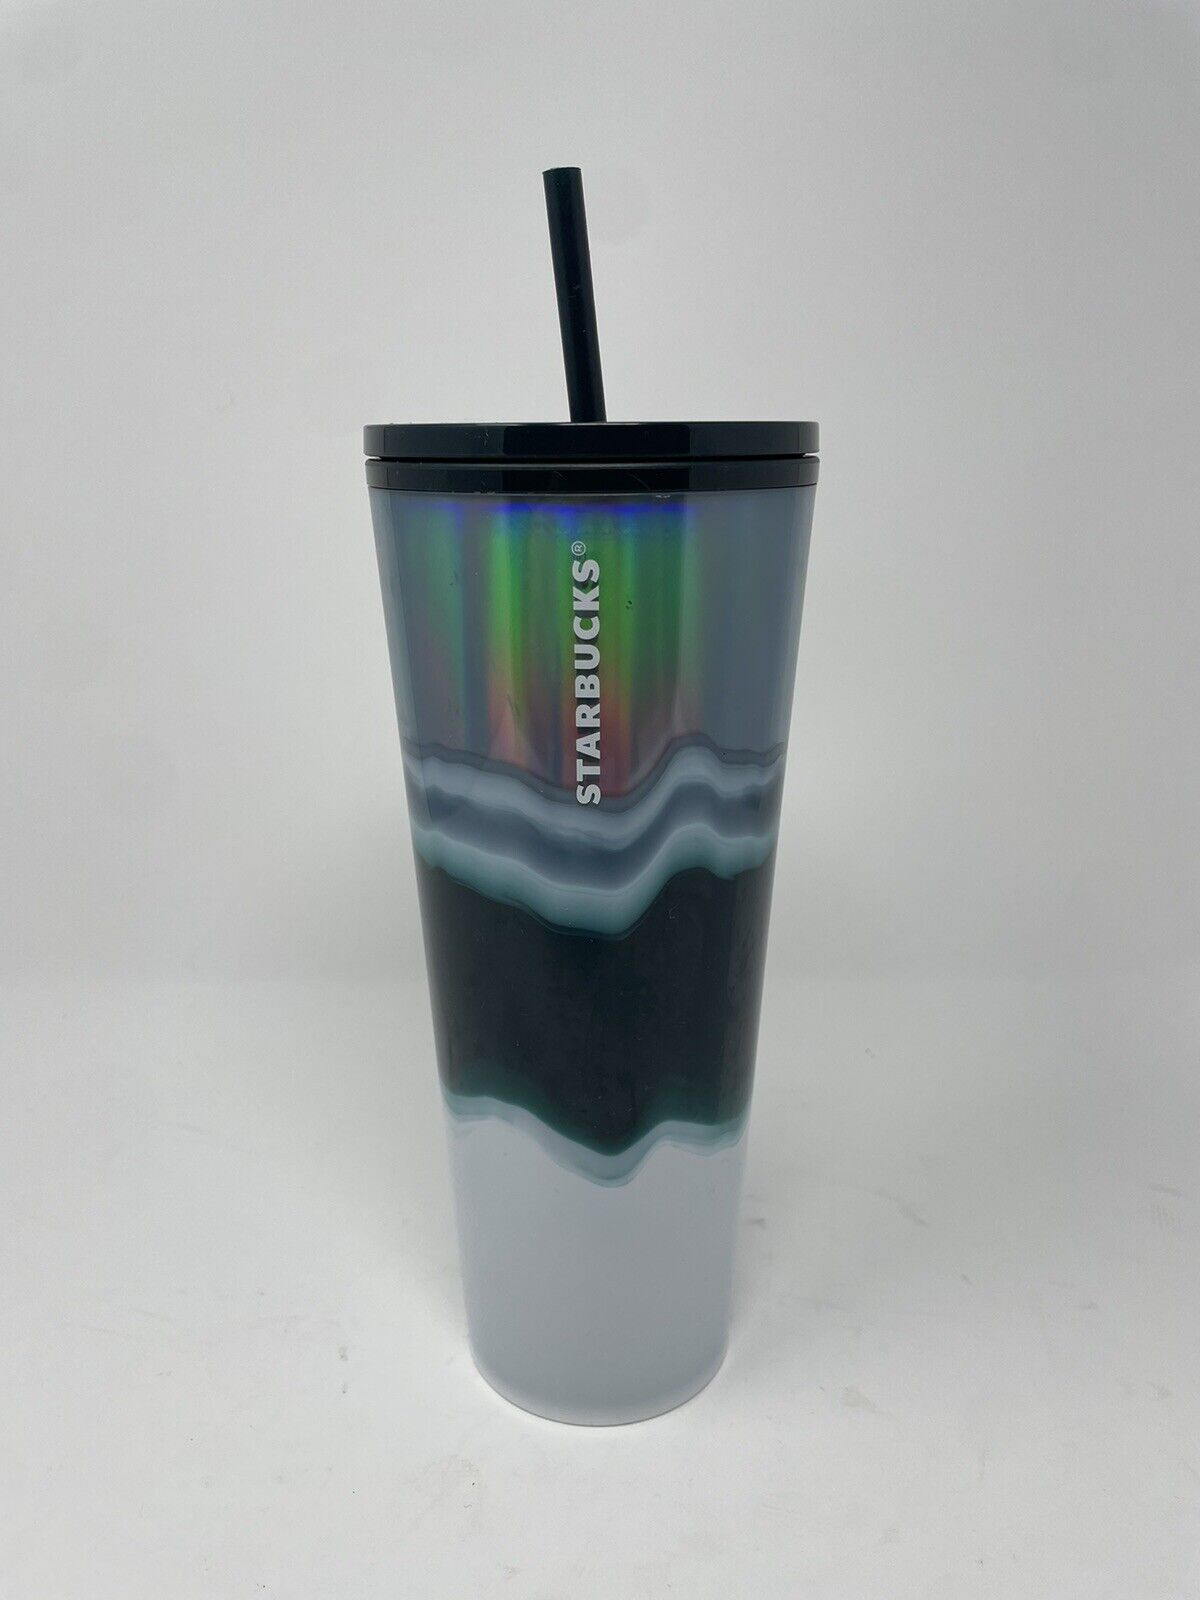 Starbucks Limited Edition 2020 Blue Green White Geode Cold Cup Tumbler 24 oz.